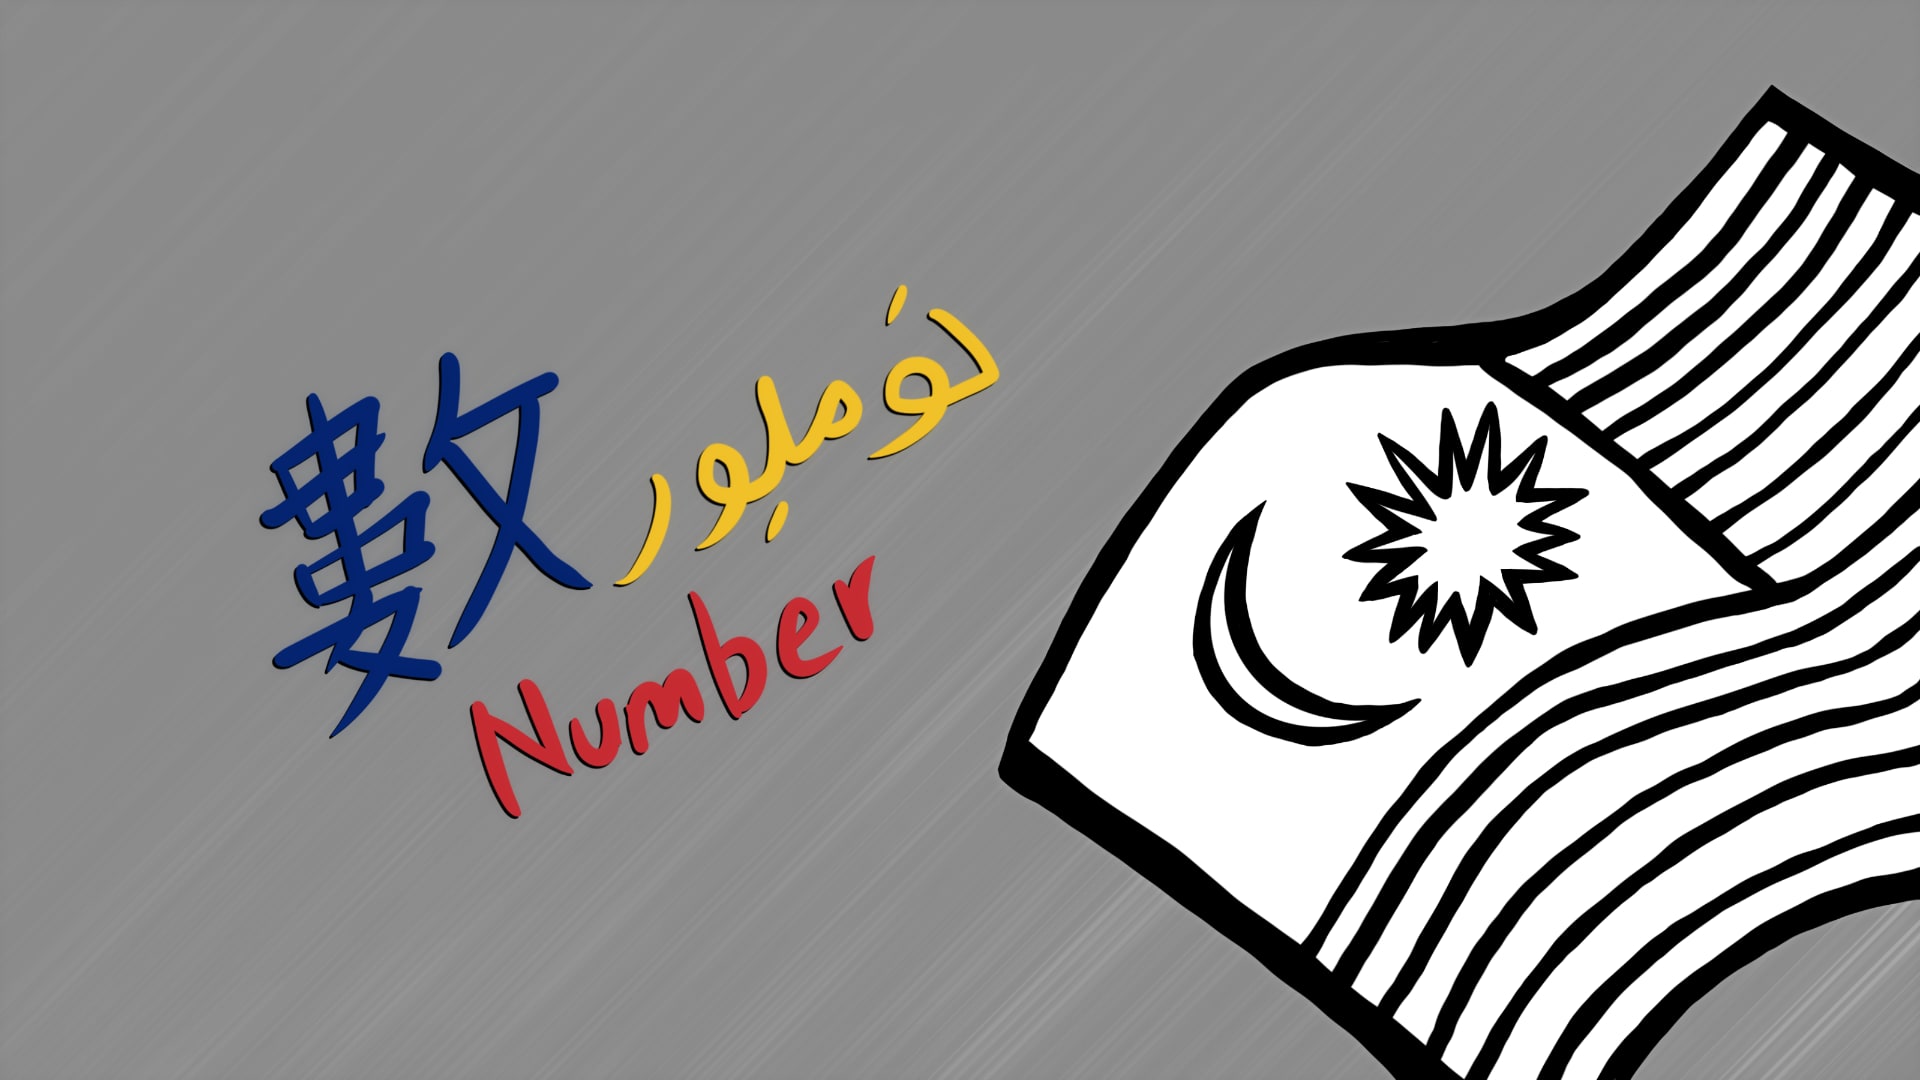 A doodle of the Malaysian flag with the word number in Chinese, Malay, and English on the left.